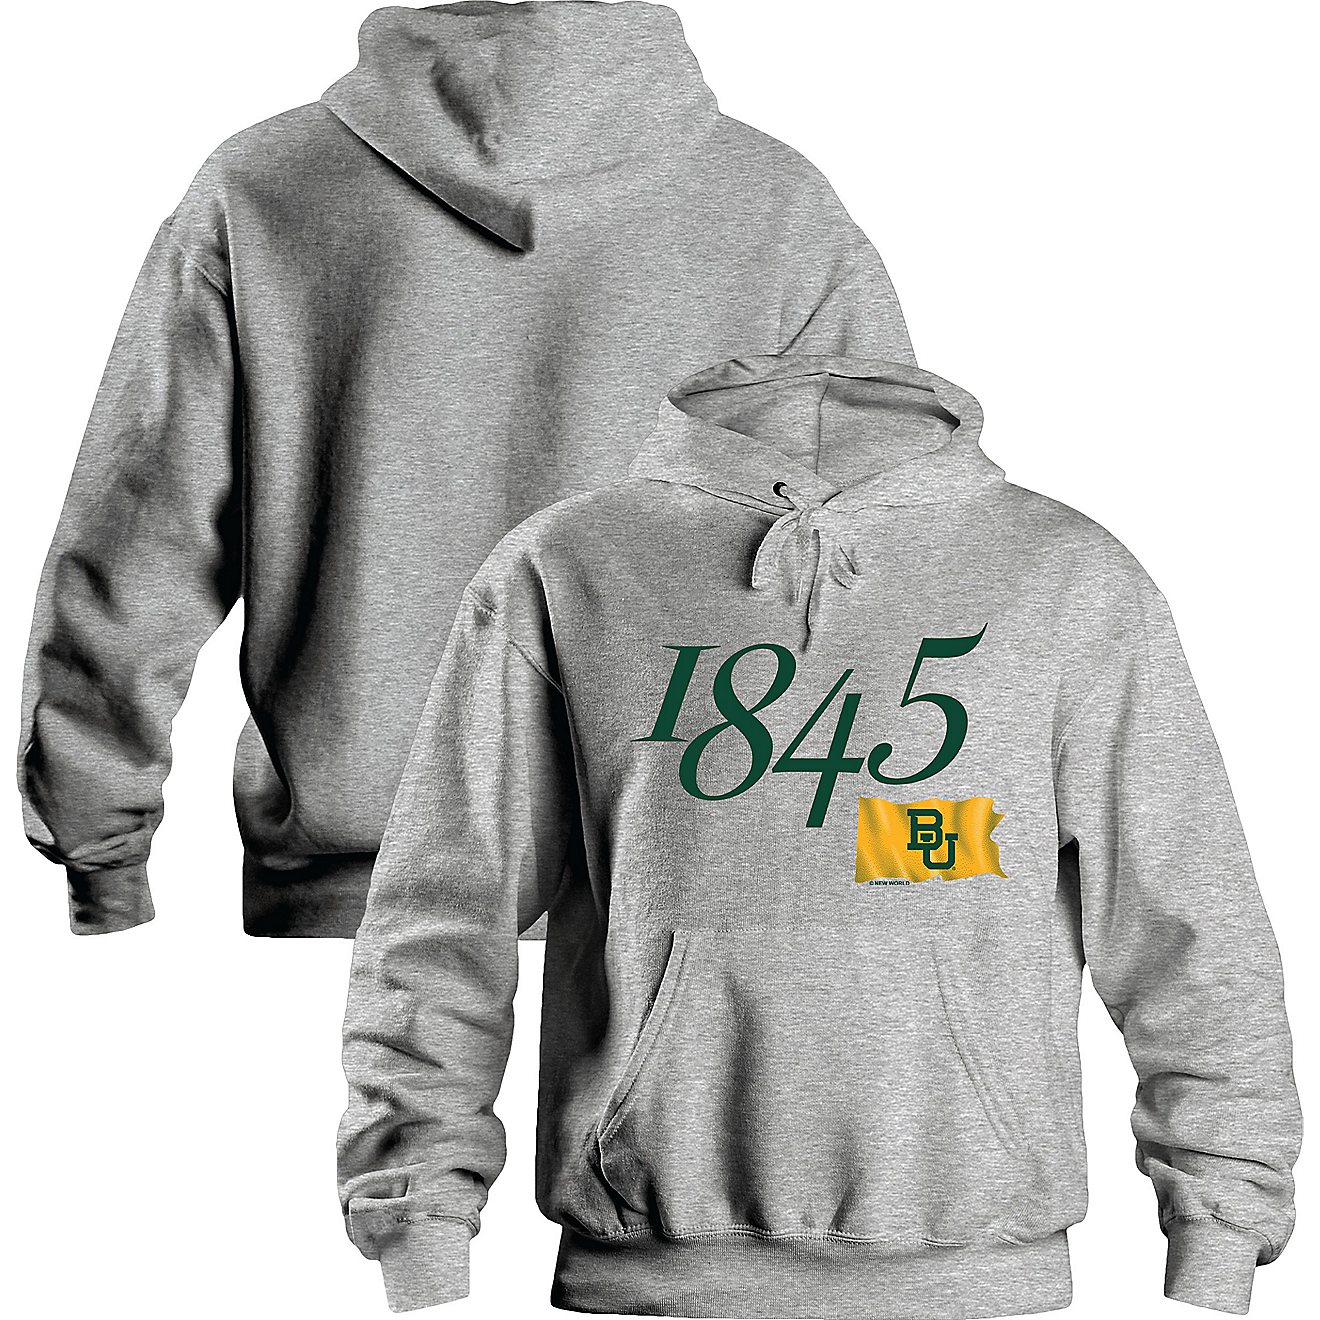 New World Graphics Men's Baylor University Founding Hoodie                                                                       - view number 1